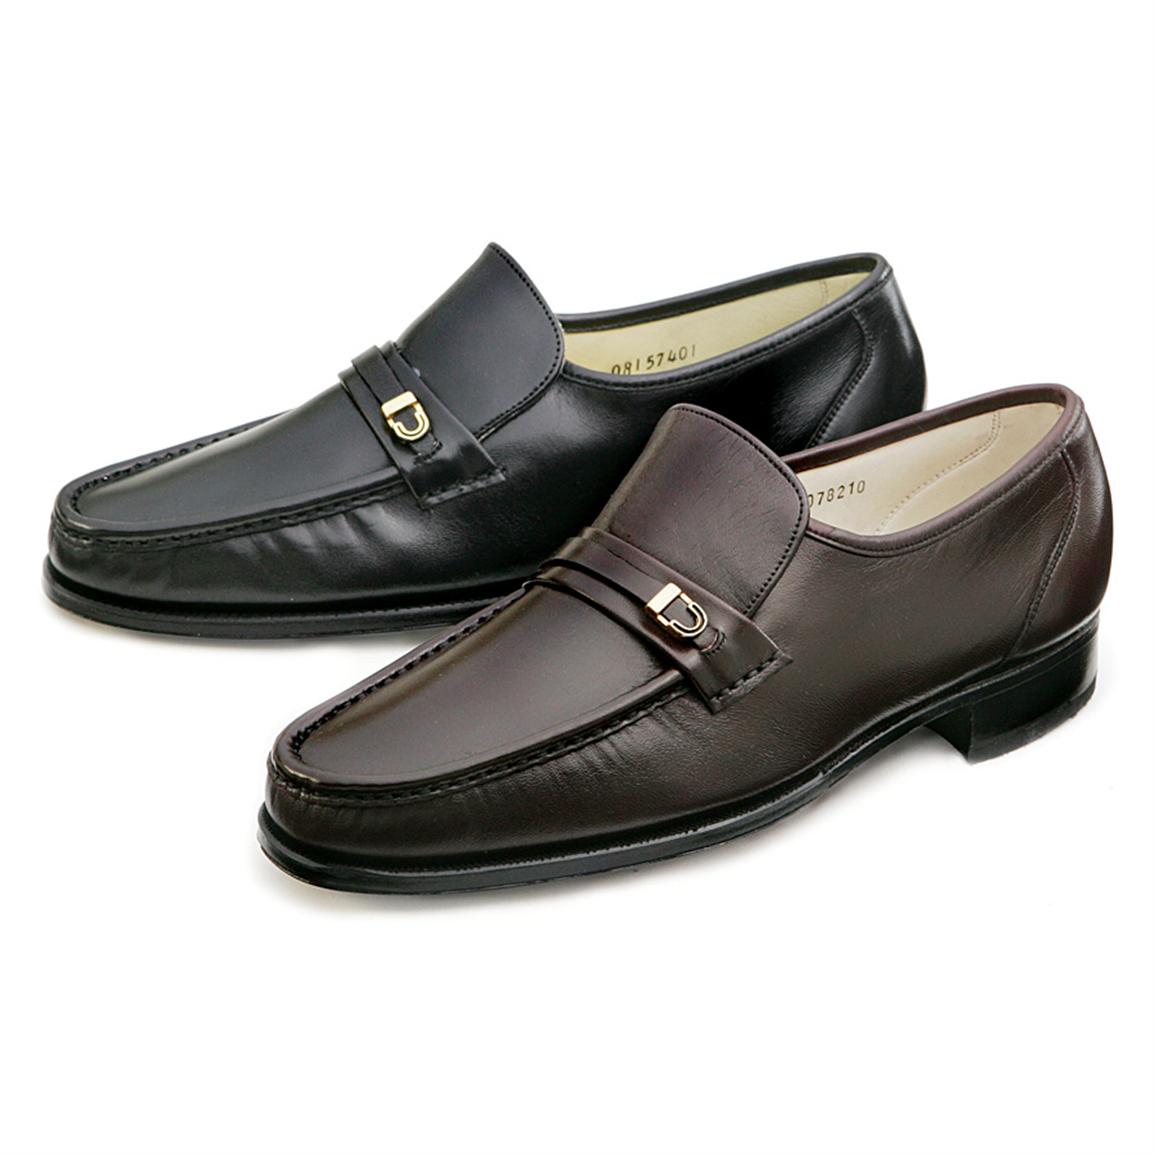 florsheim imperial loafers